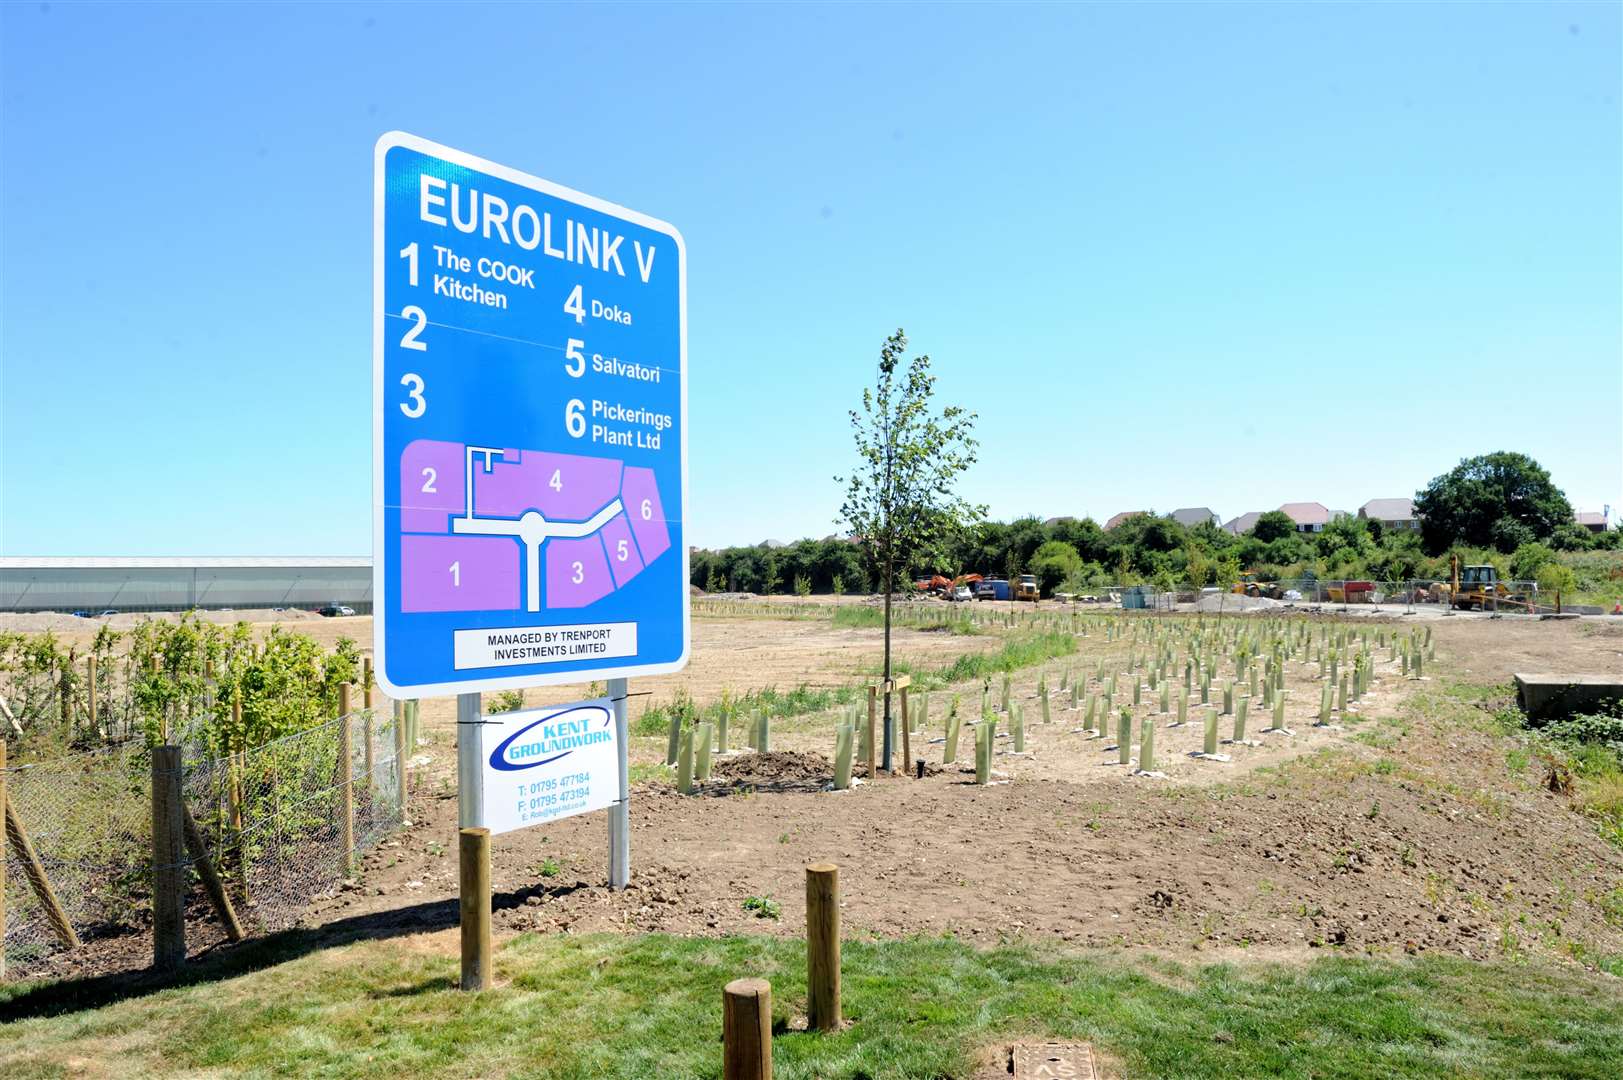 Eurolink V already has a number of tenants including The COOK Kitchen